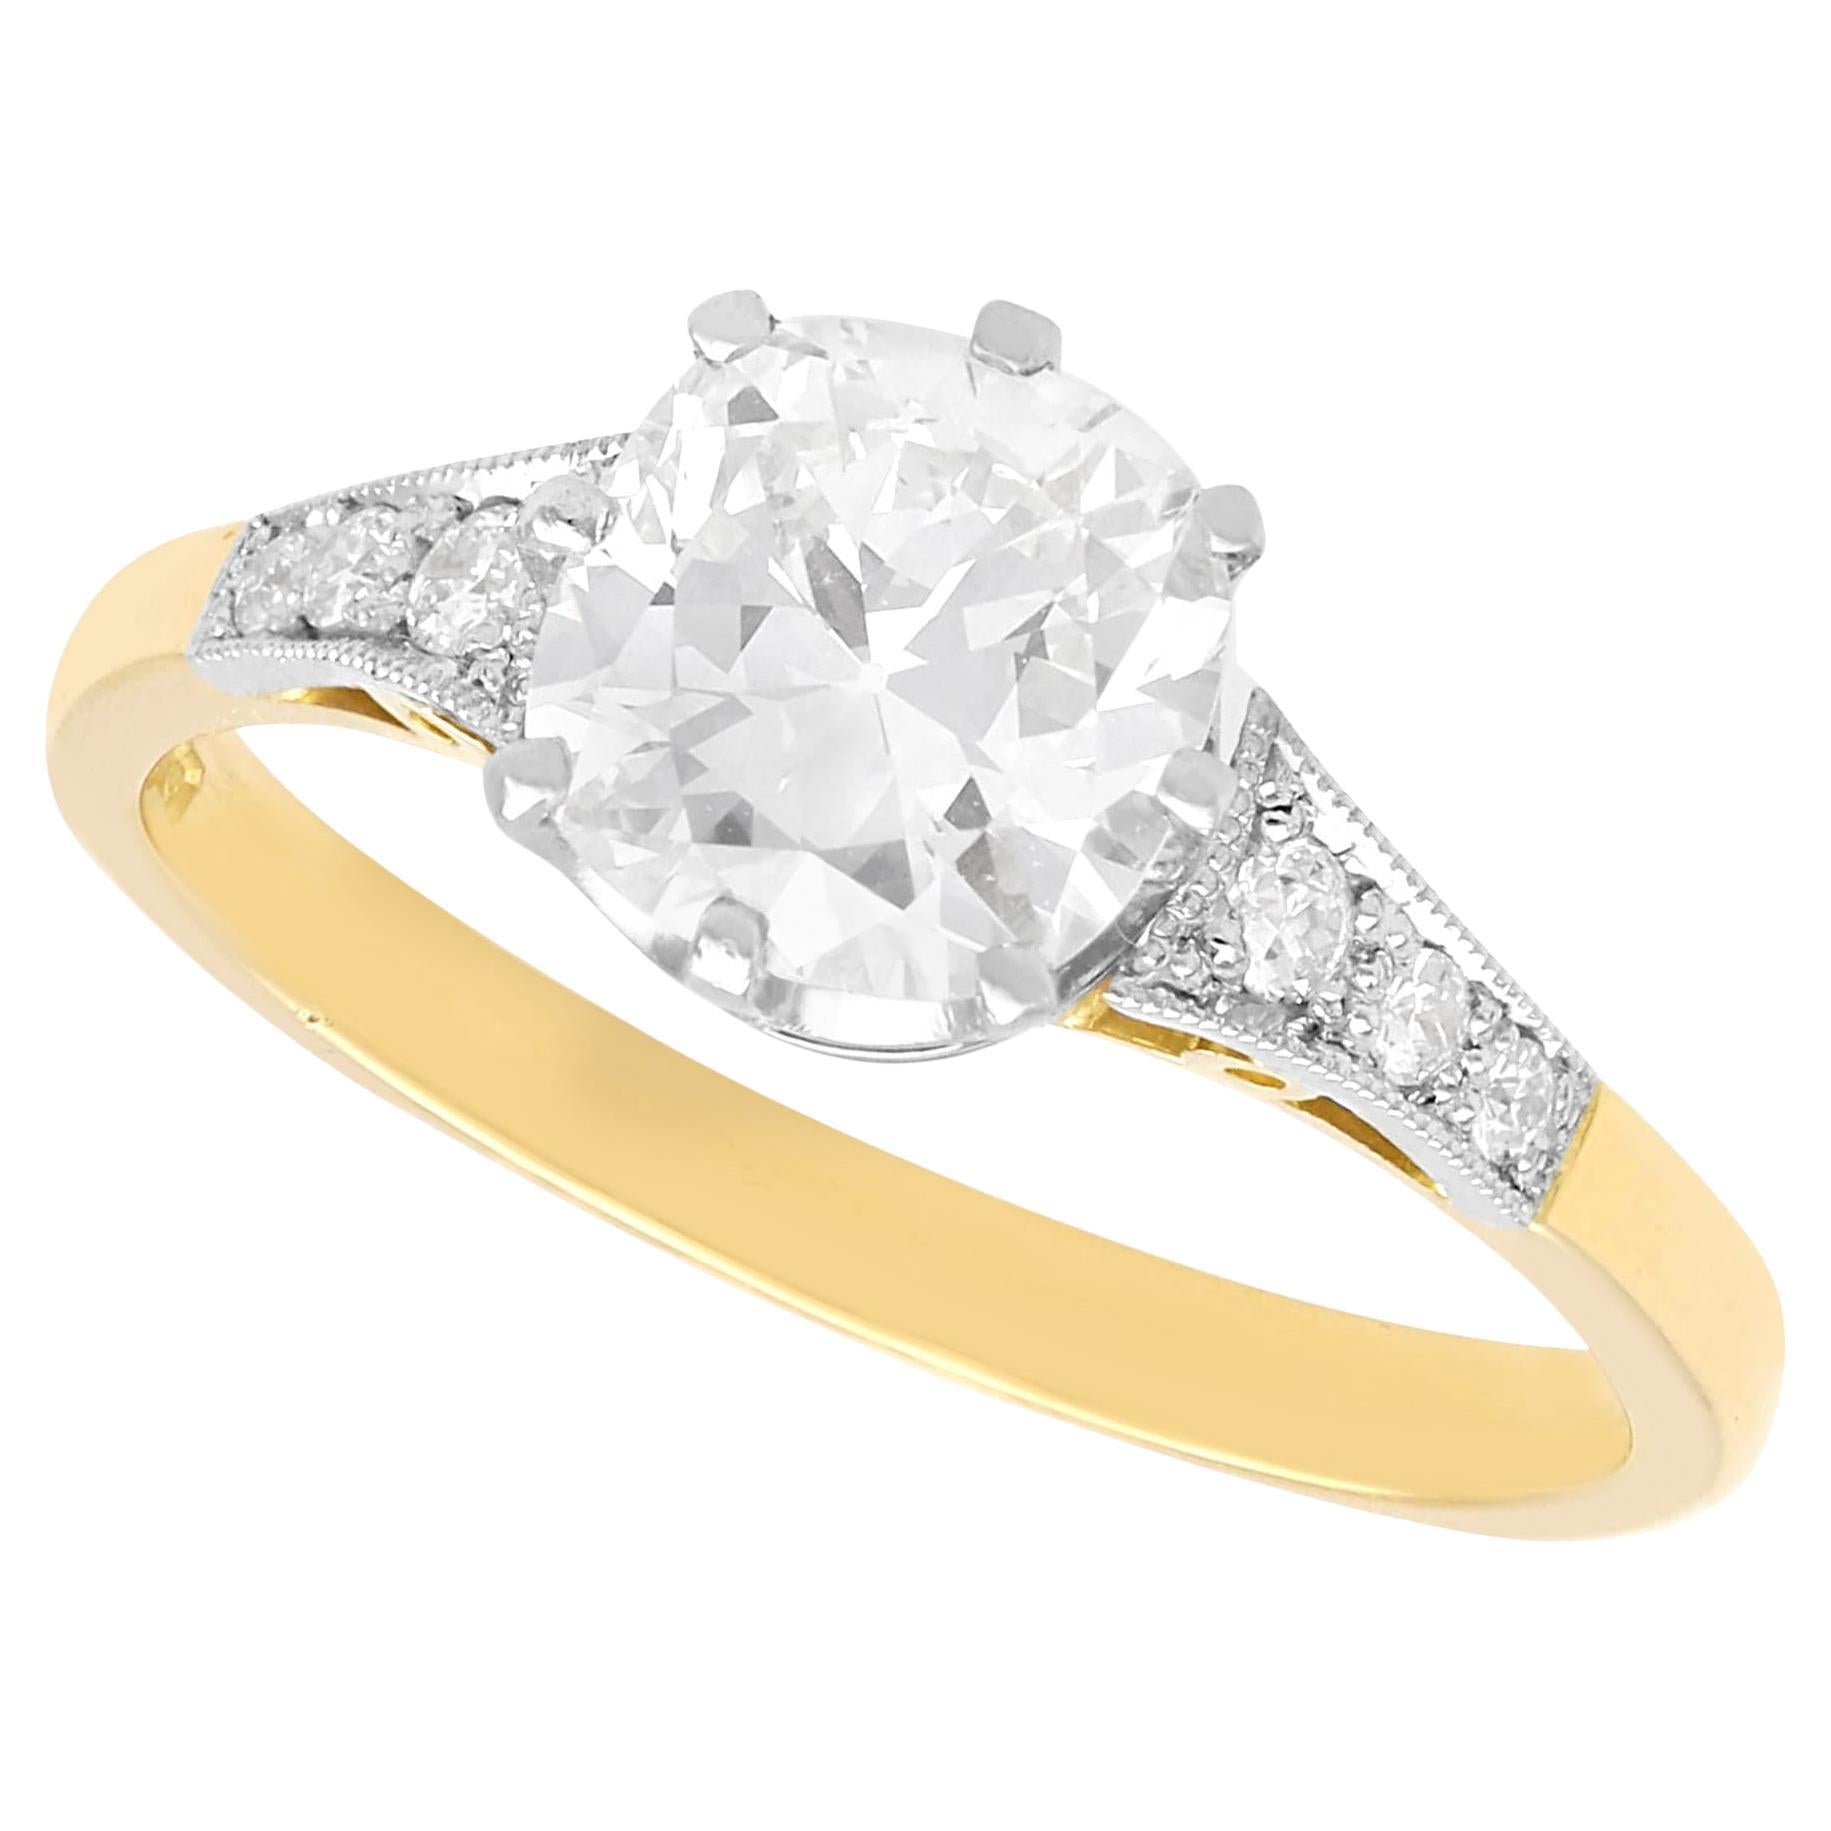 Antique and Contemporary 1.54 Carat Diamond and Yellow Gold Solitaire Ring